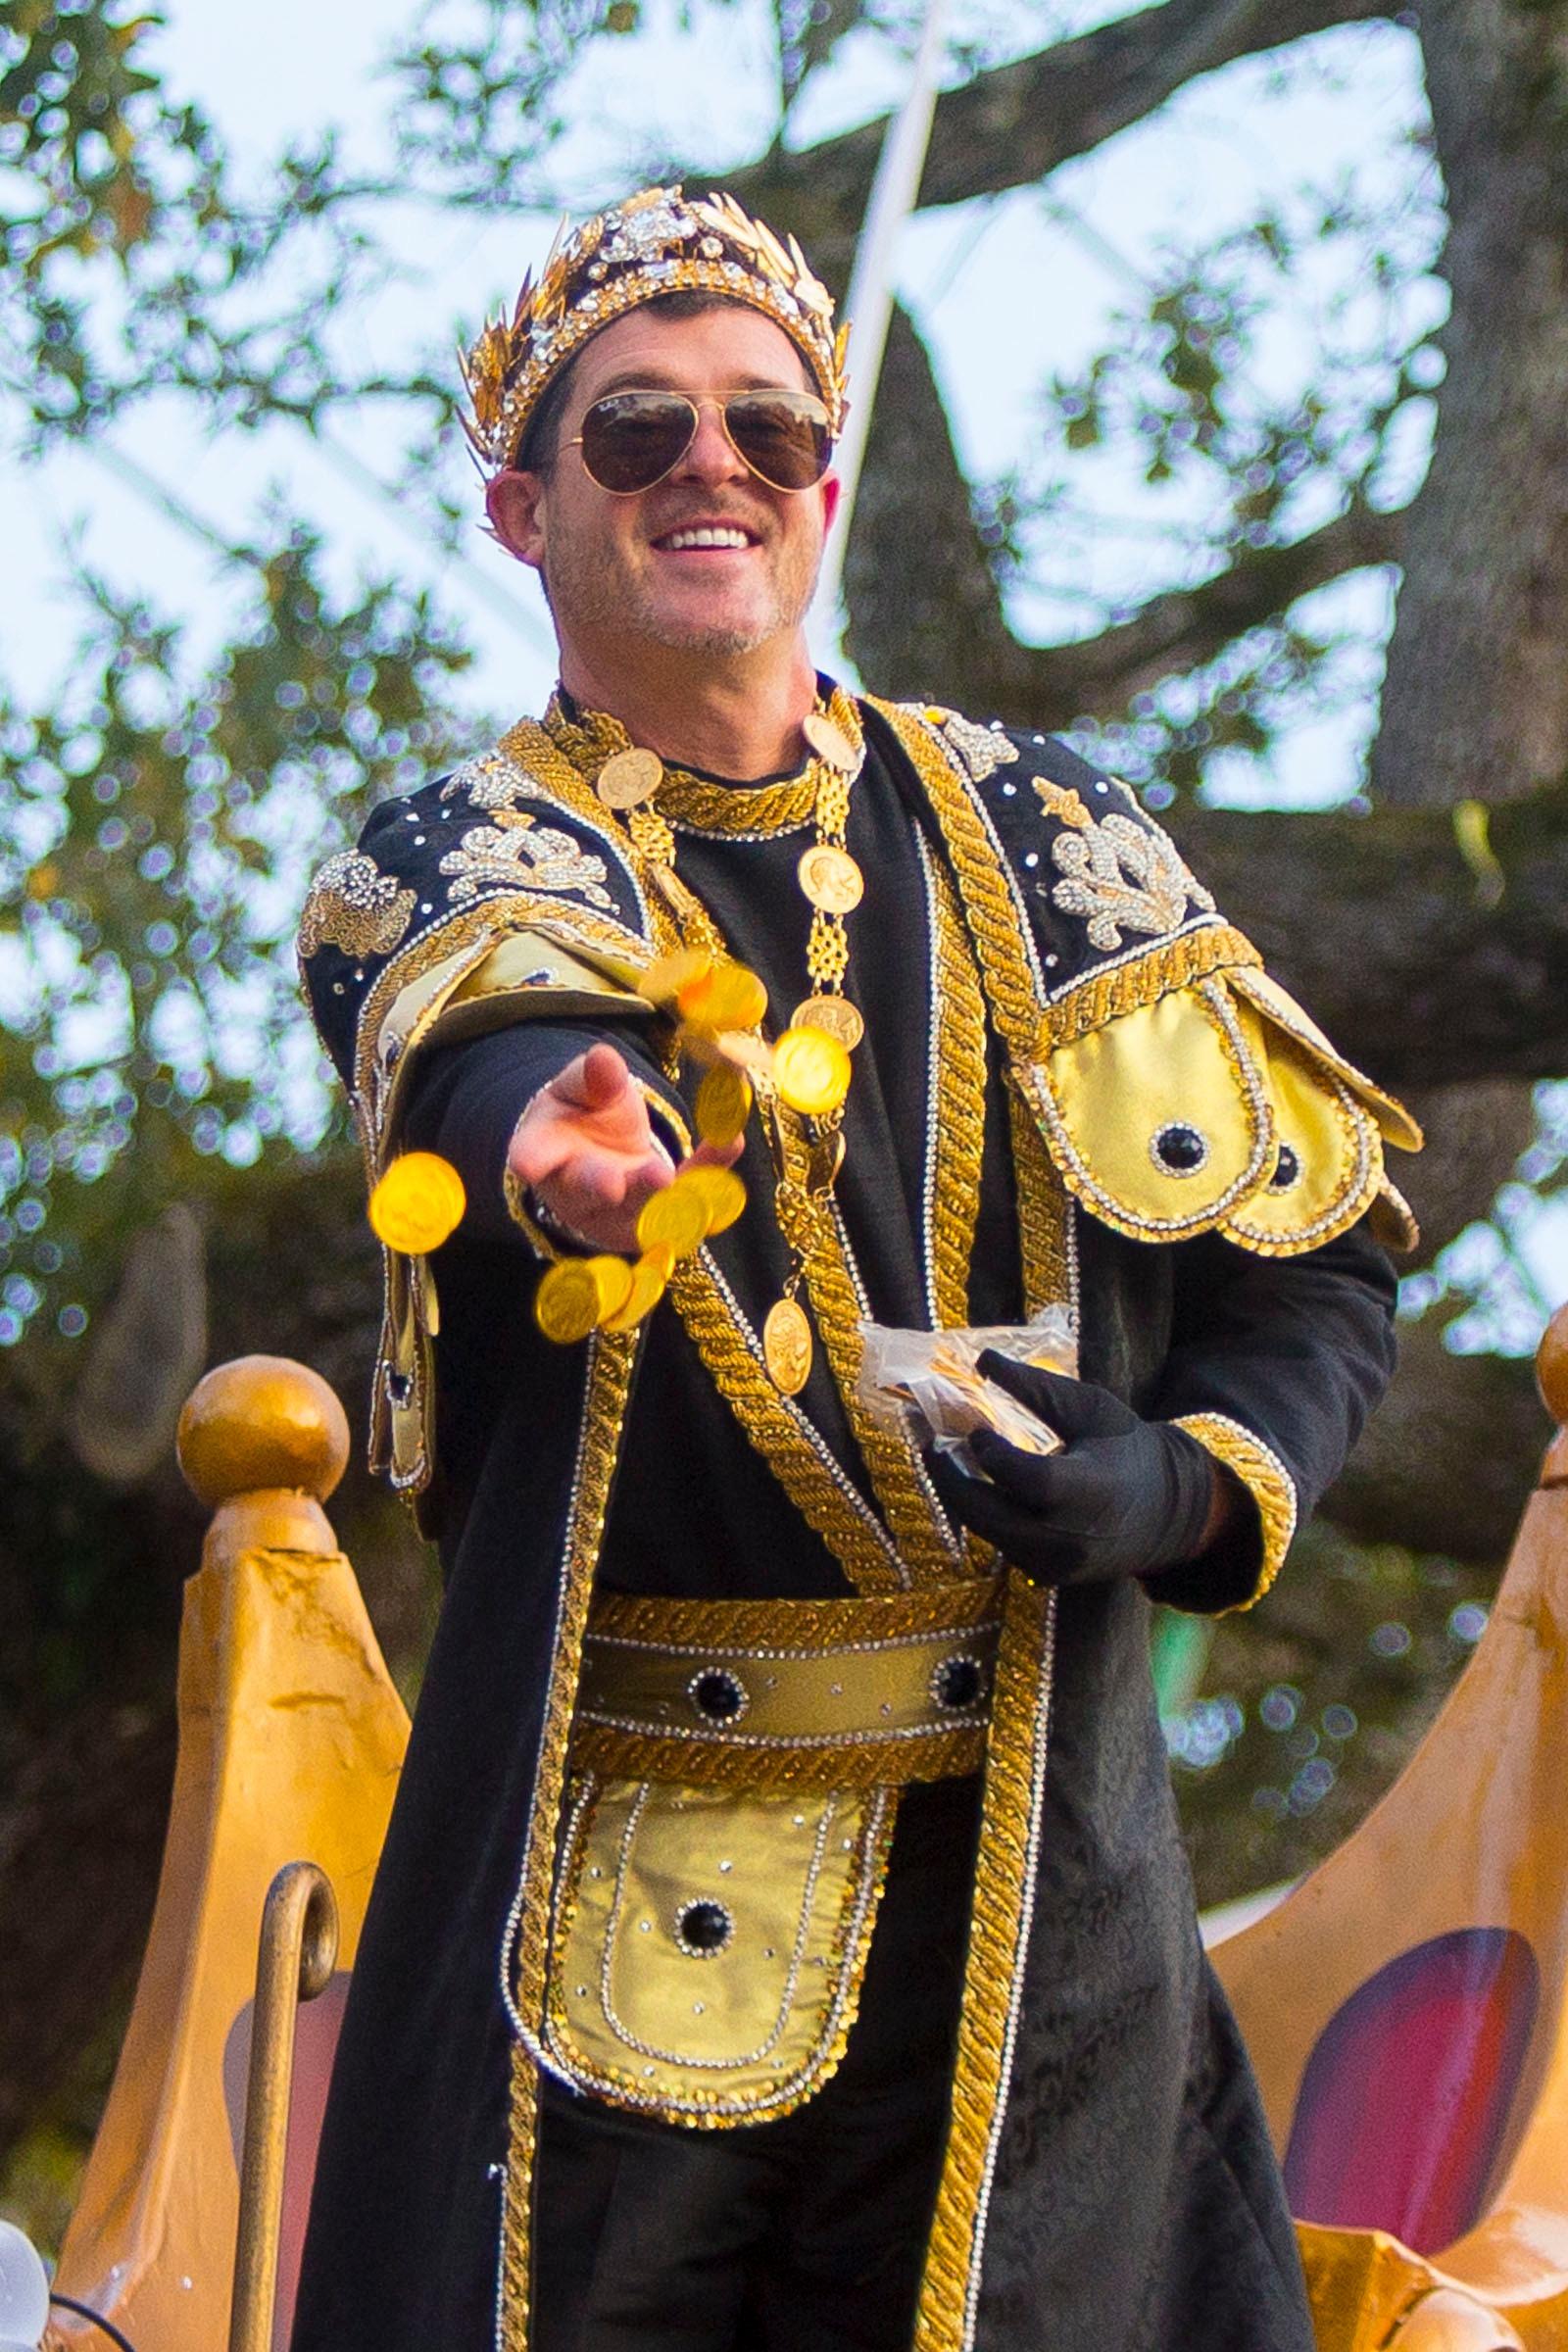 Blurred lines singer And Masked Singer judge Robin Thicke reigned as King in the Mardi Gras parade 'Bacchus' with his son Julian as tribute to his father Alan.